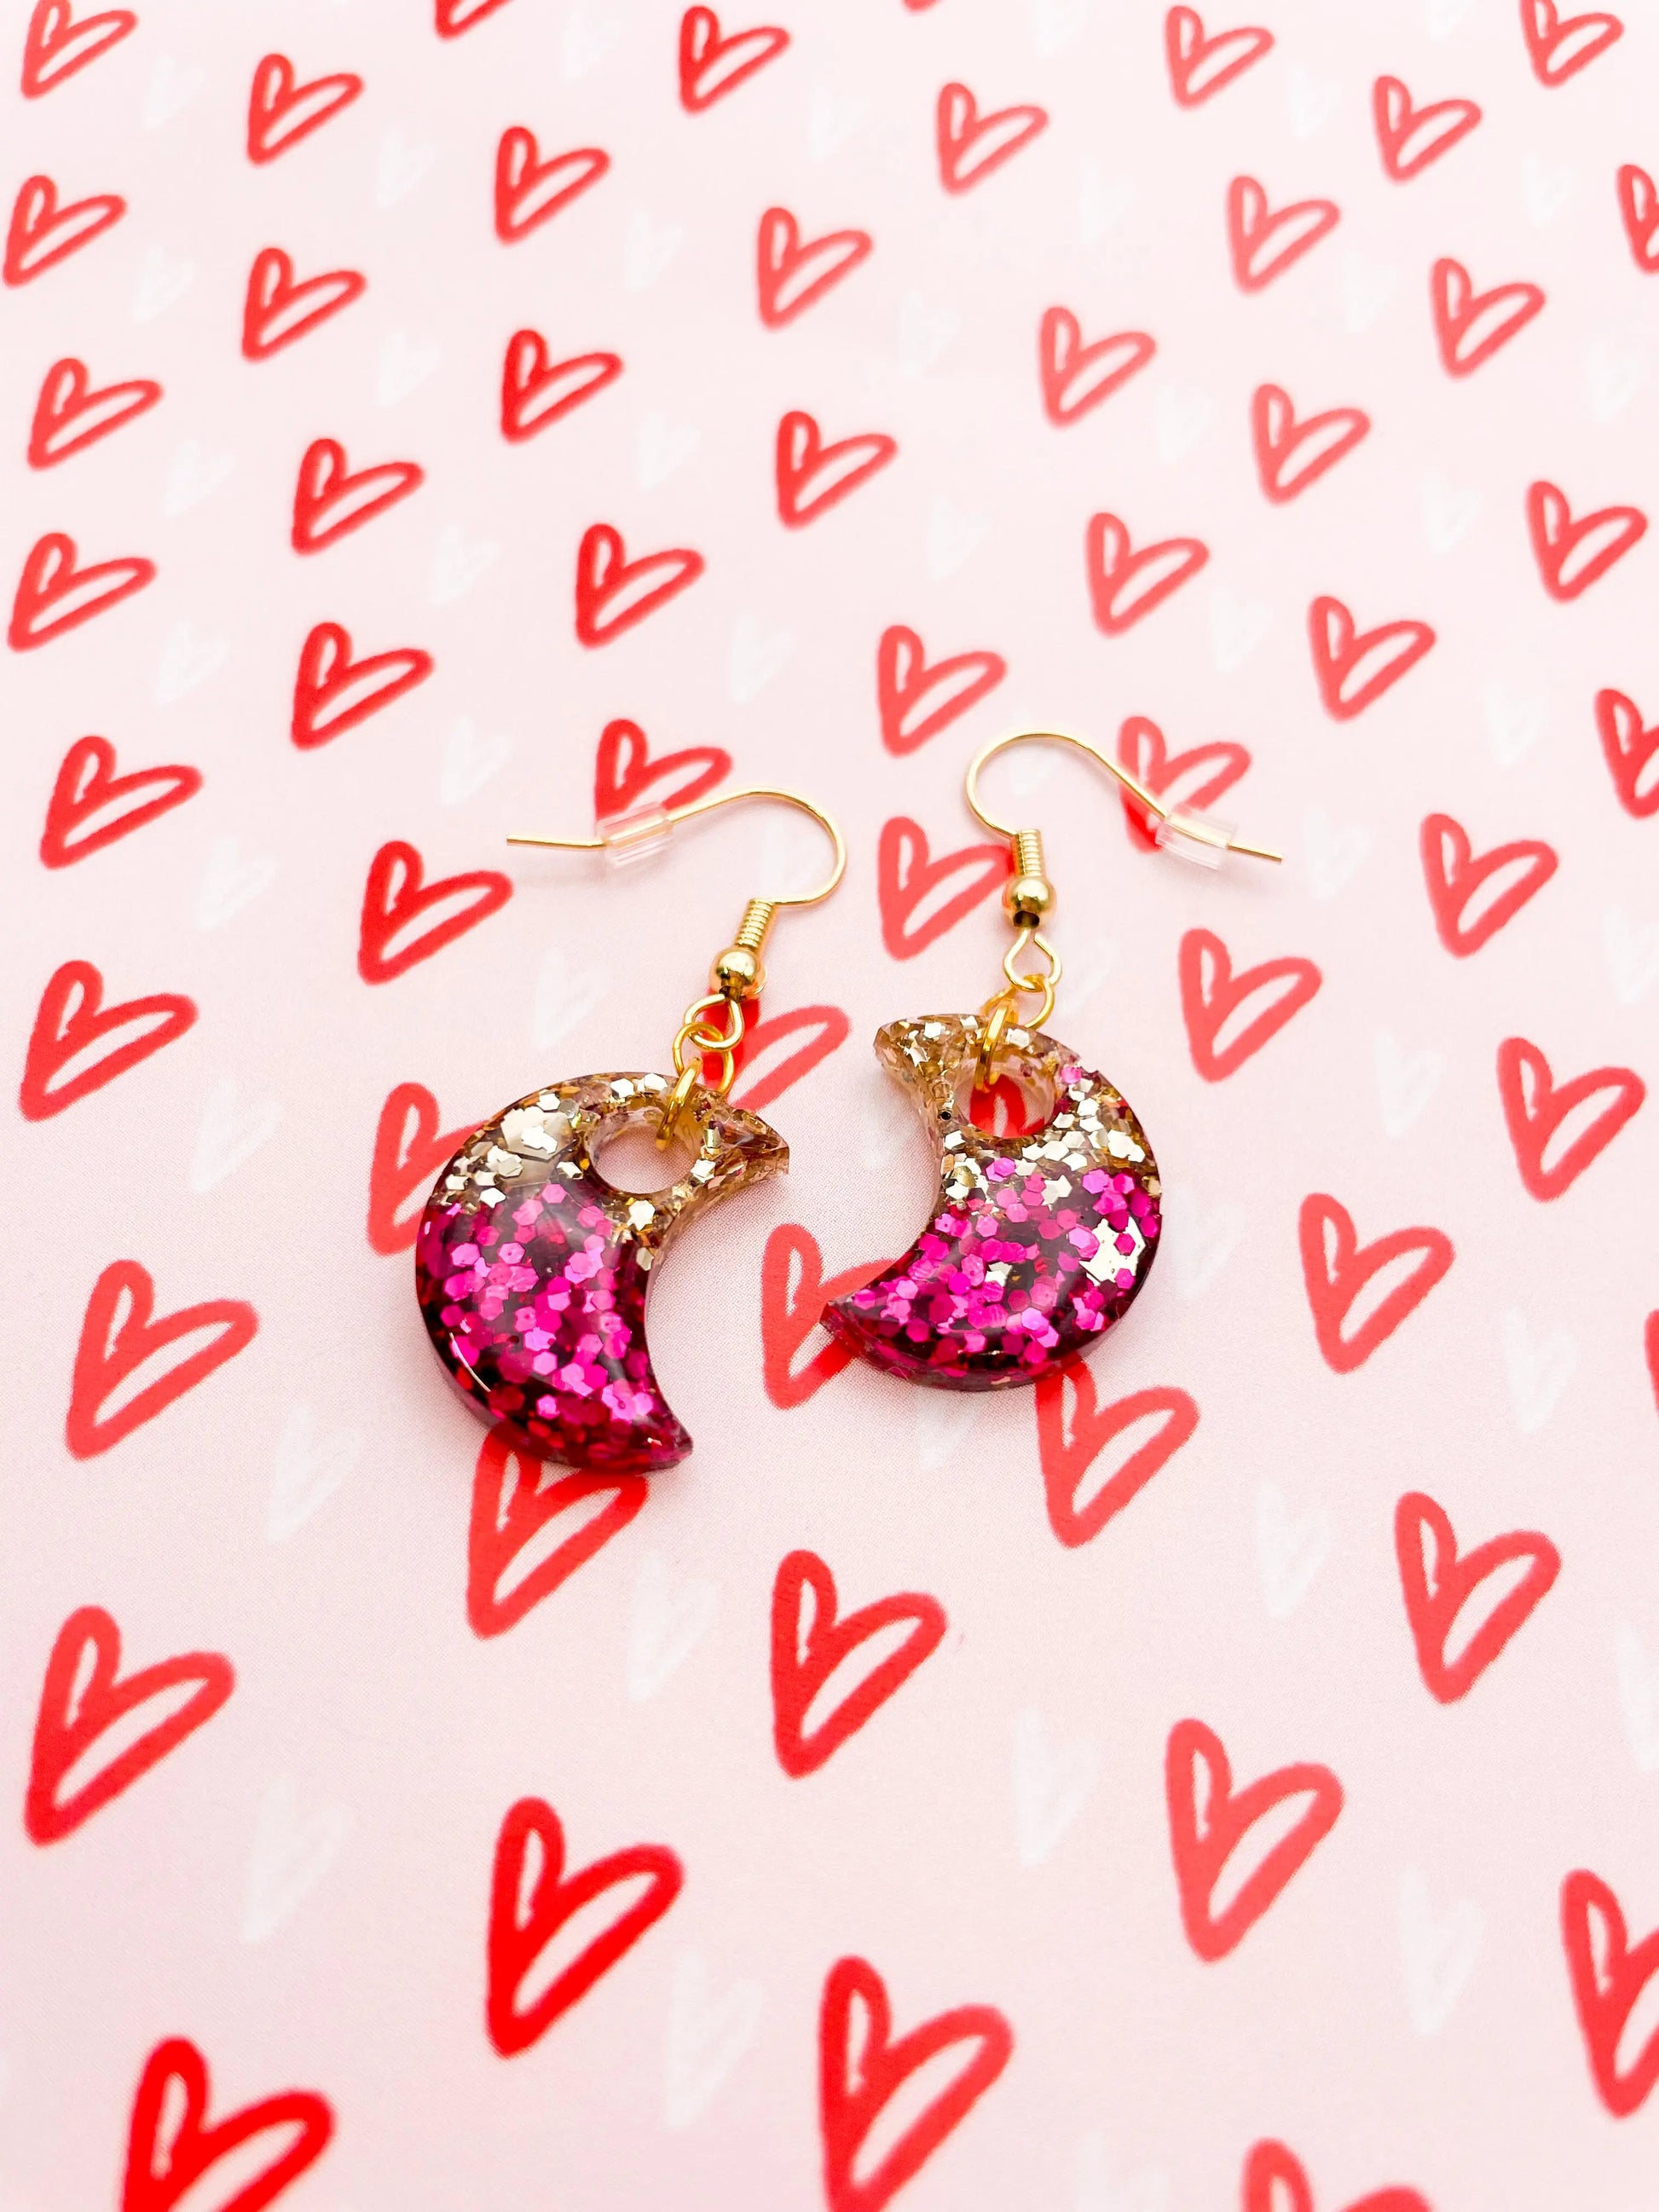 Medium Hot Pink and Gold Glitter Ombre Resin Moon Dangle Earrings from Sapphire Frills